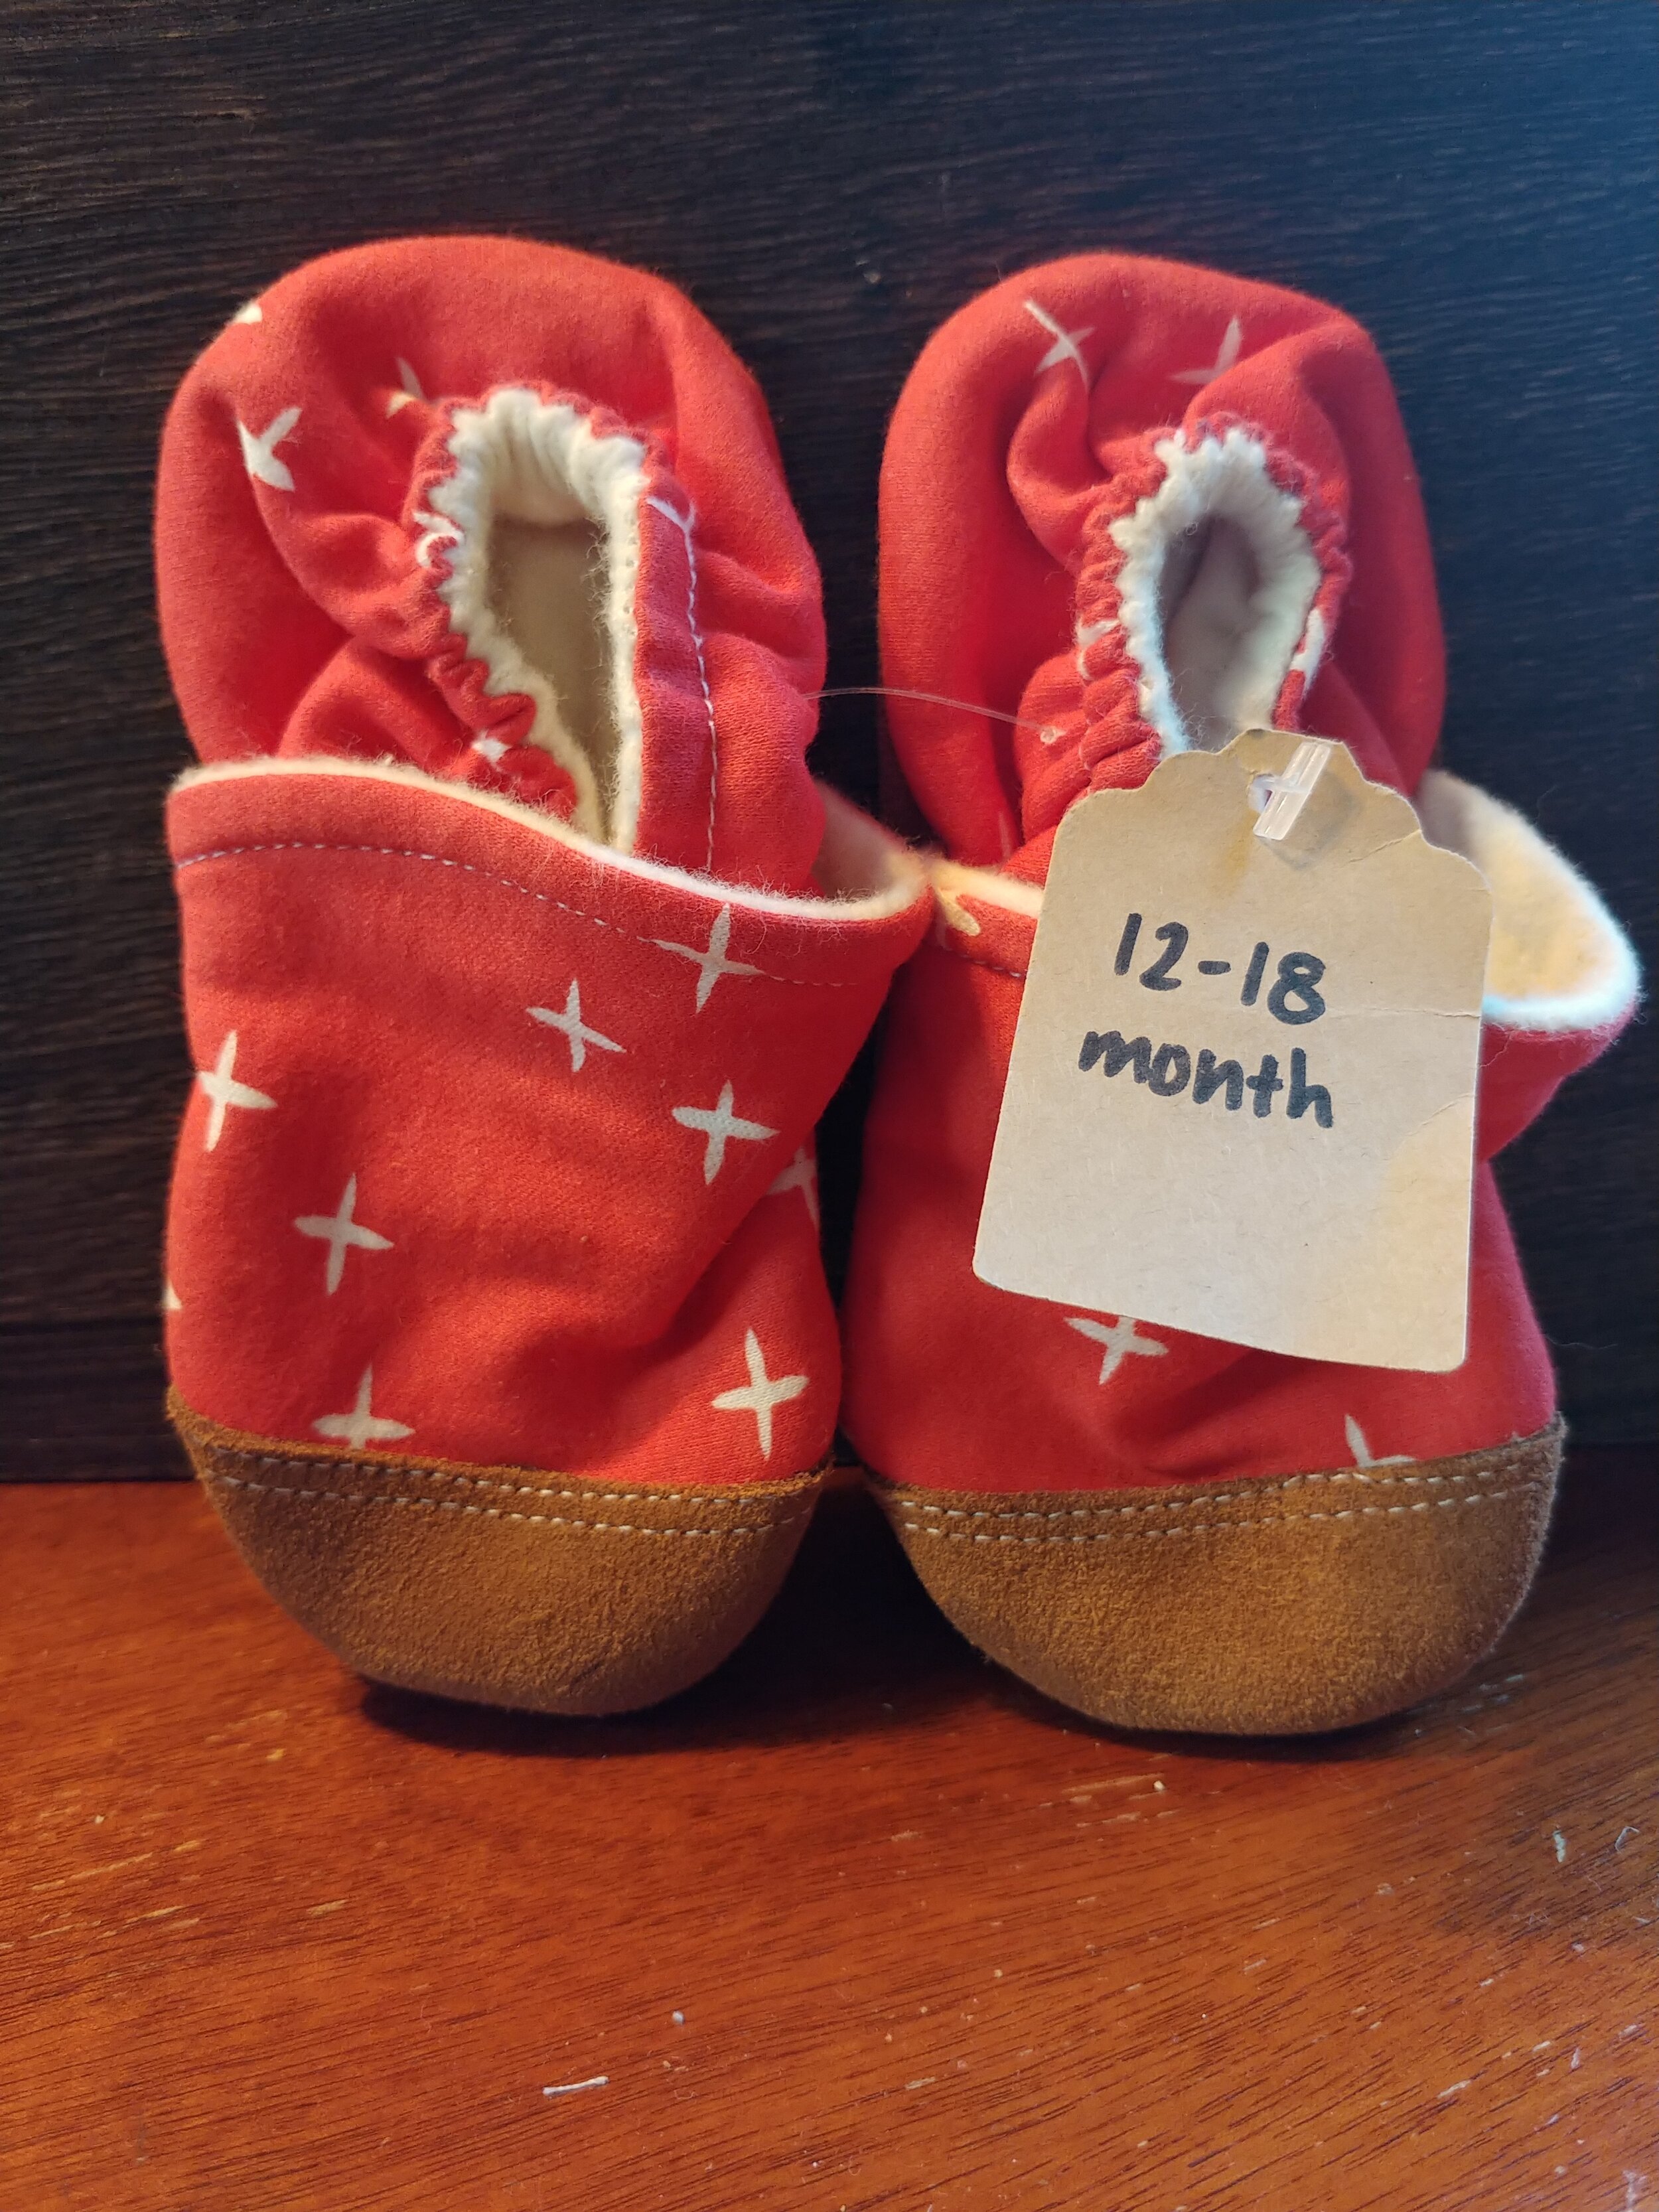 18 month slippers